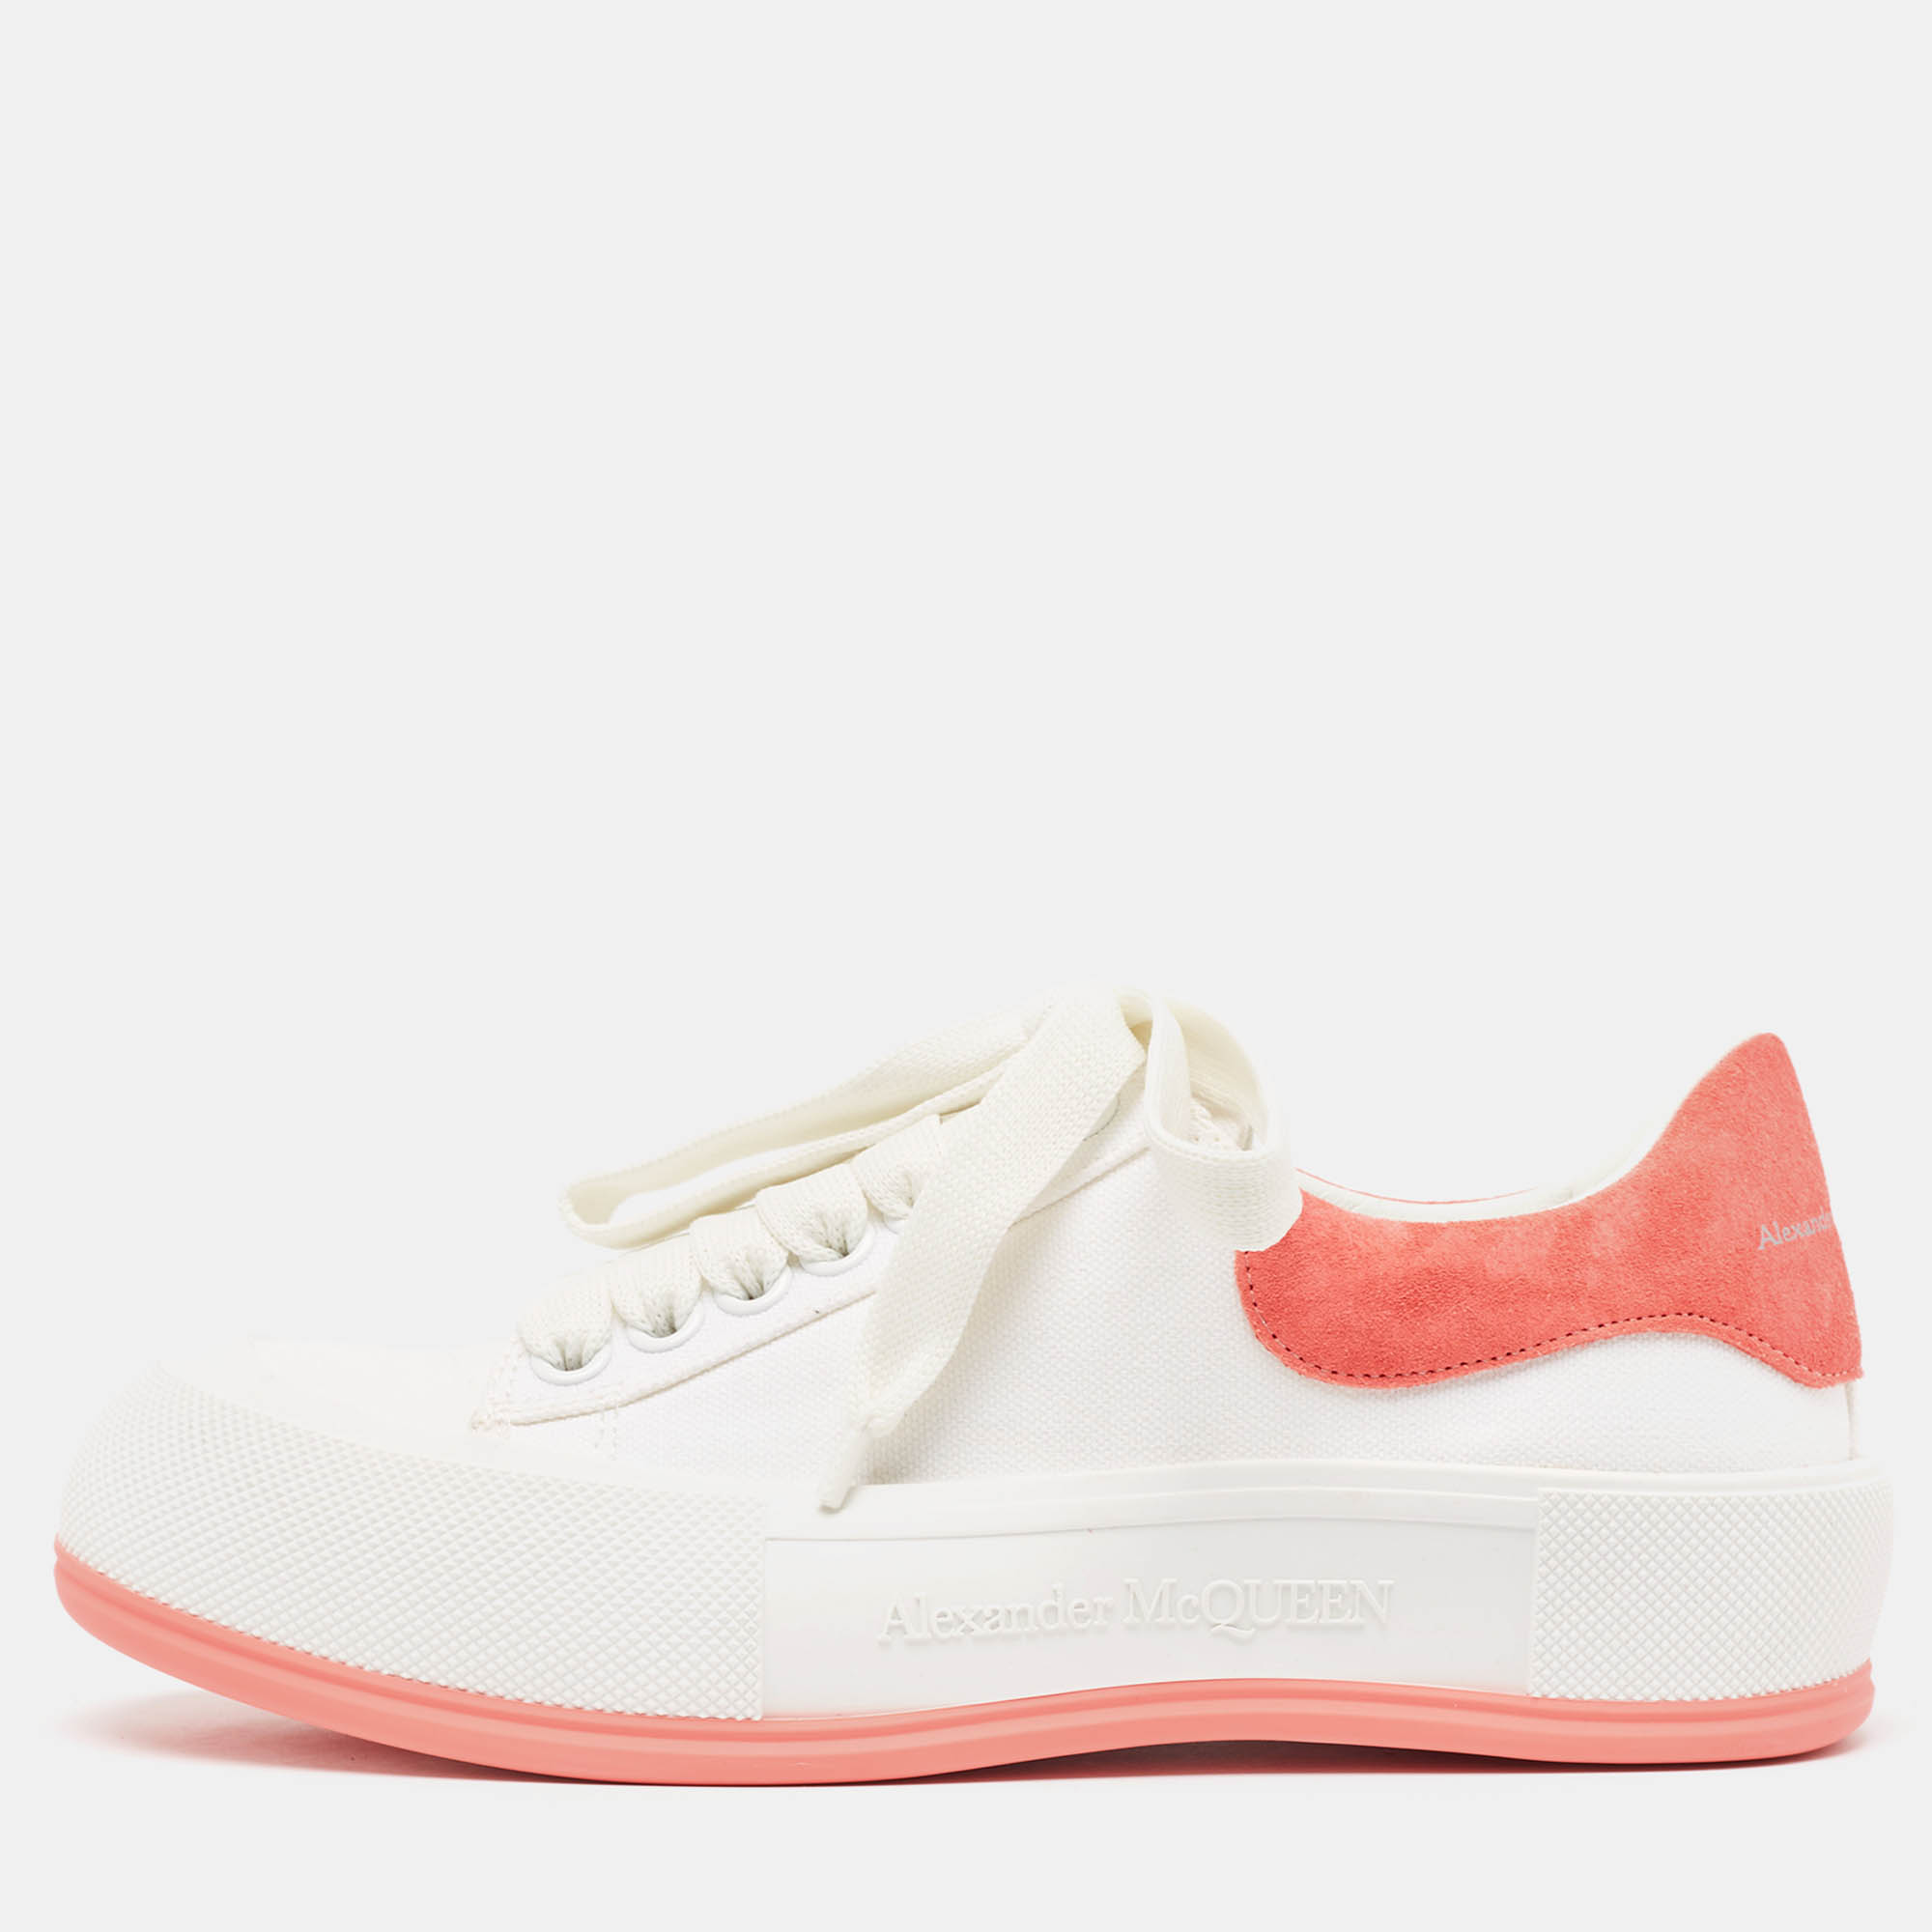 Alexander mcqueen white/pink canvas and suede deck plimsoll sneakers size 37.5